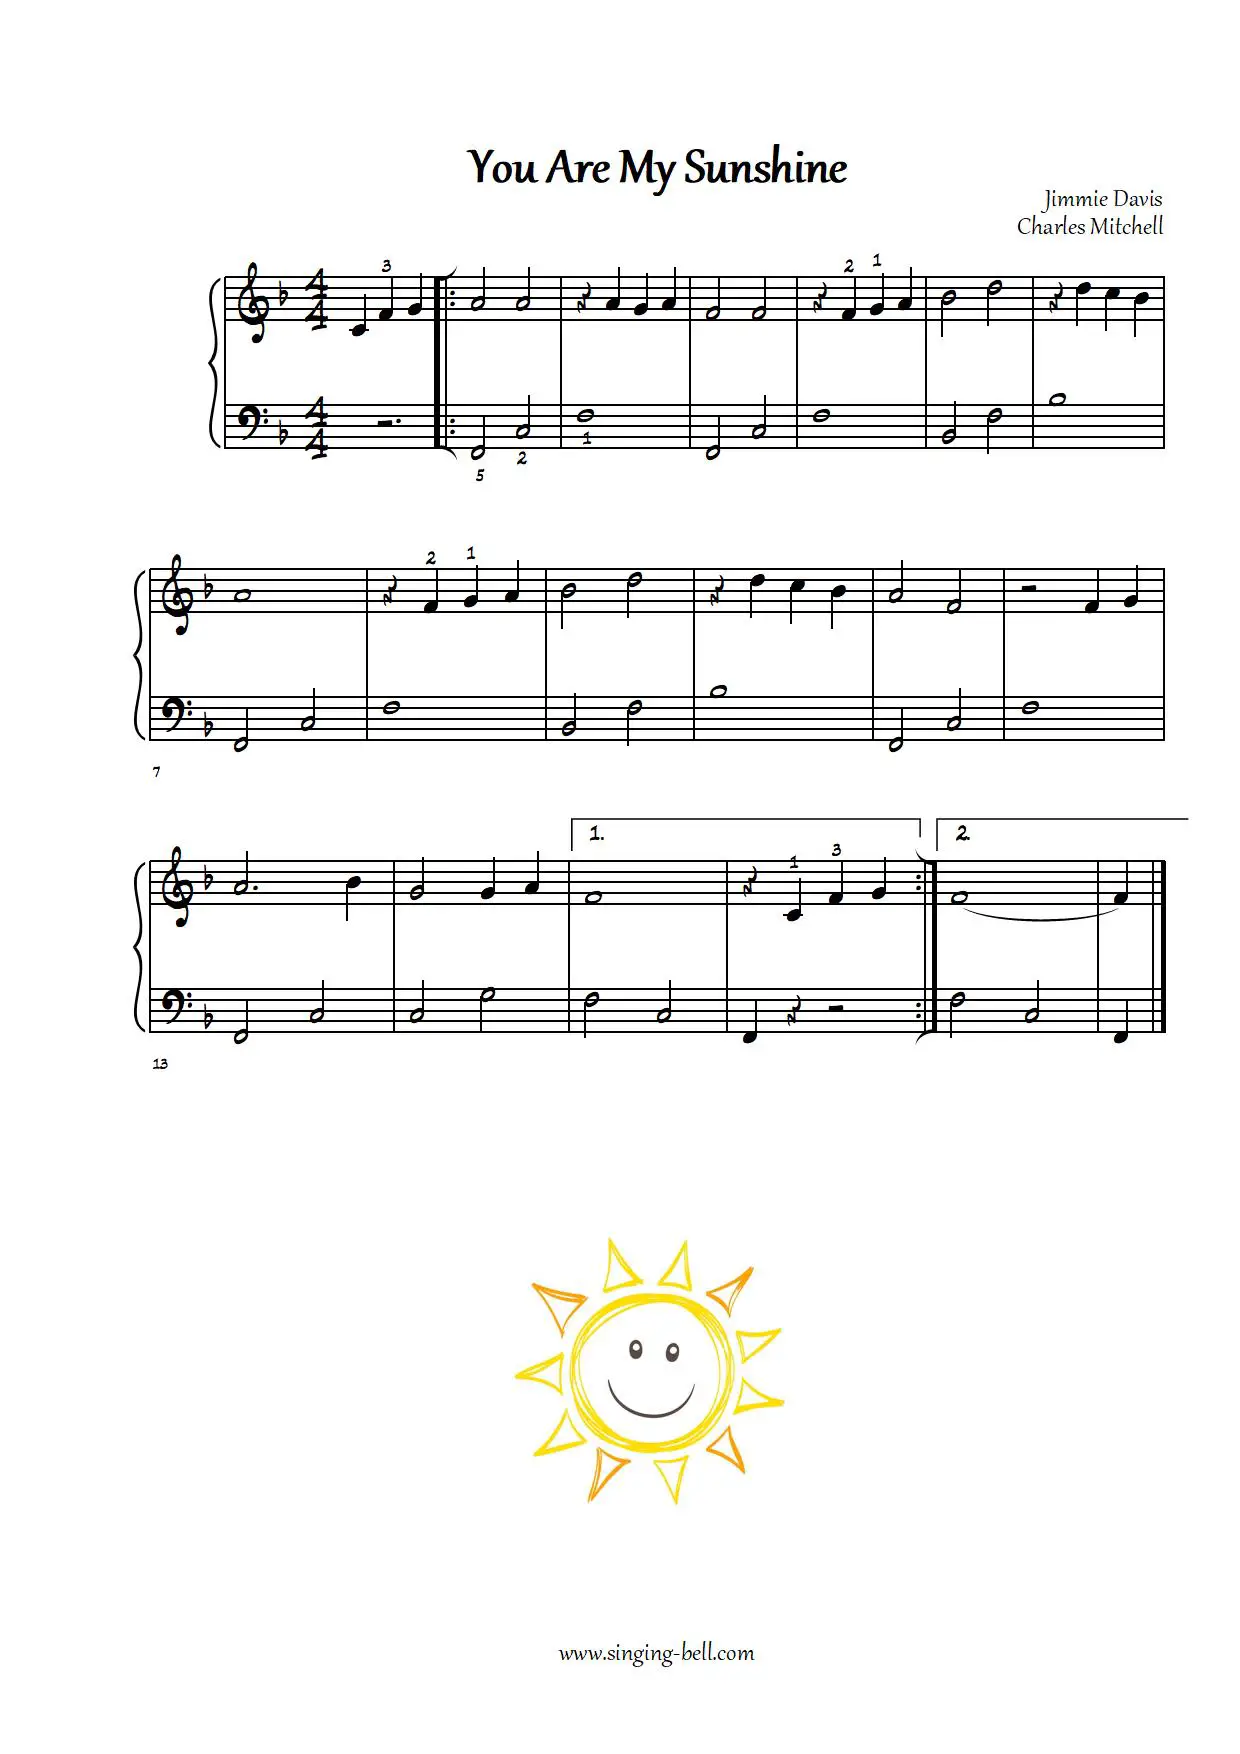 You Are My Sunshine easy piano sheet music notes beginners pdf